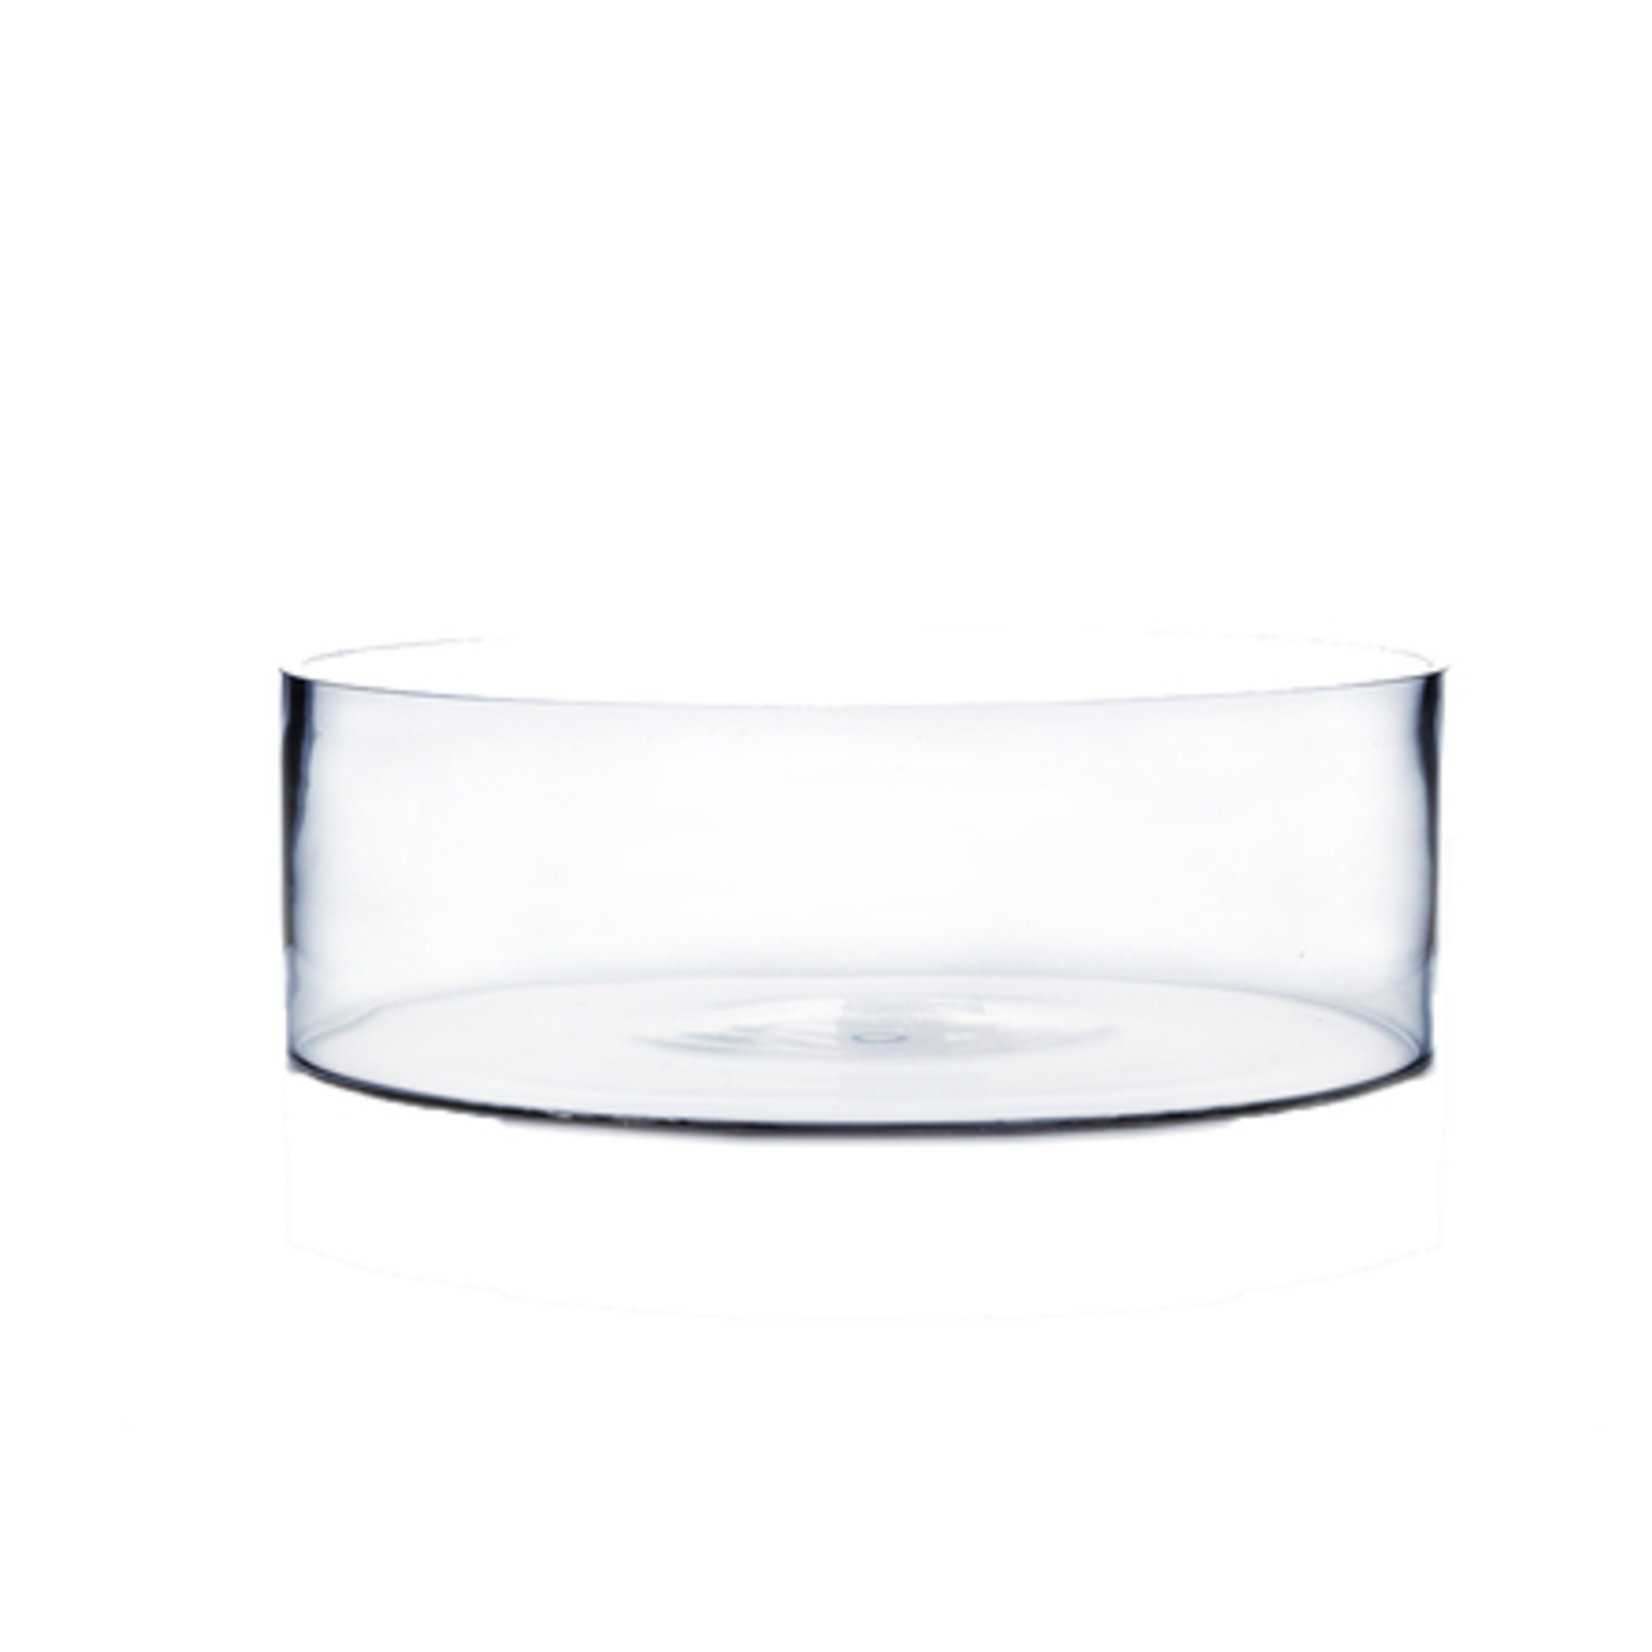 4"H X 12"D CLEAR GLASS LOW CYLINDER/DISH